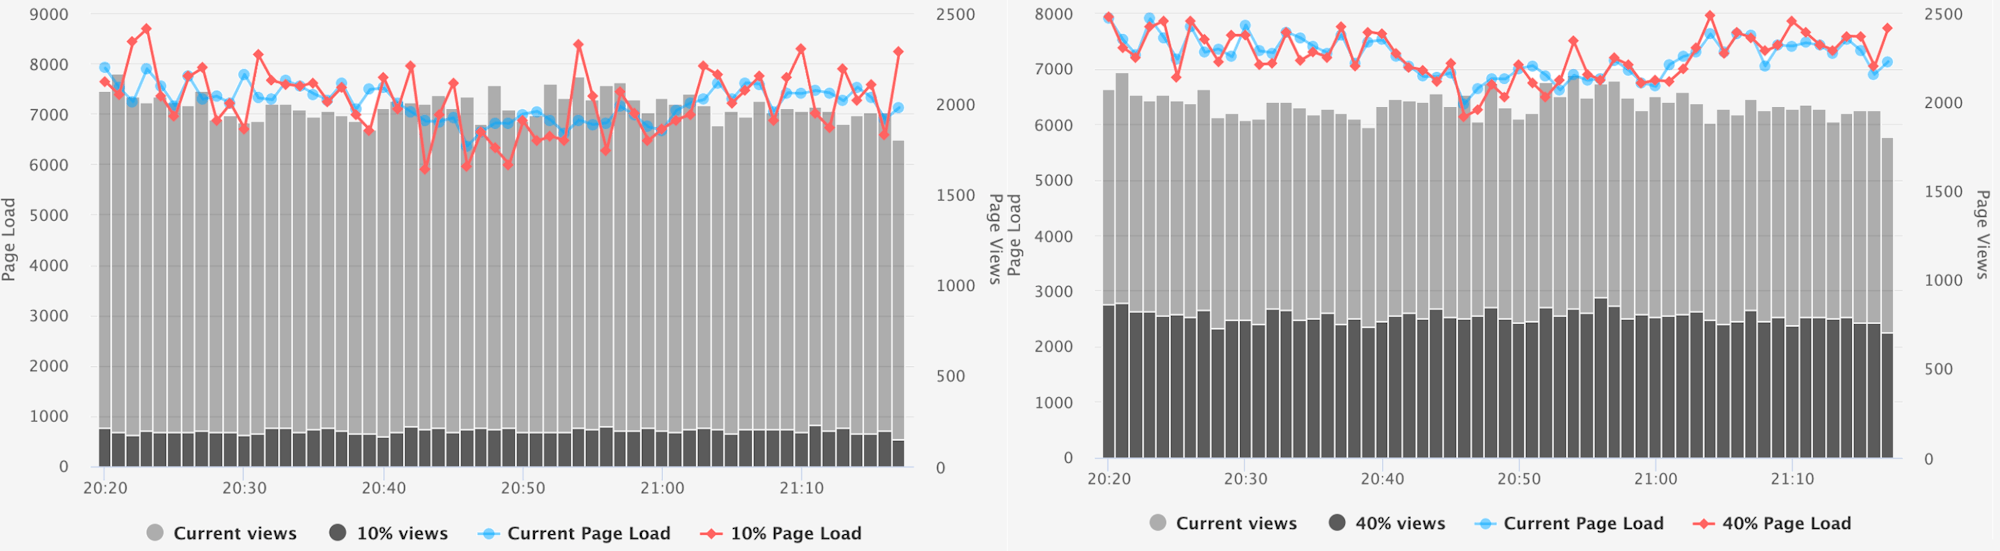 Time series comparison of realtime data for a large site.